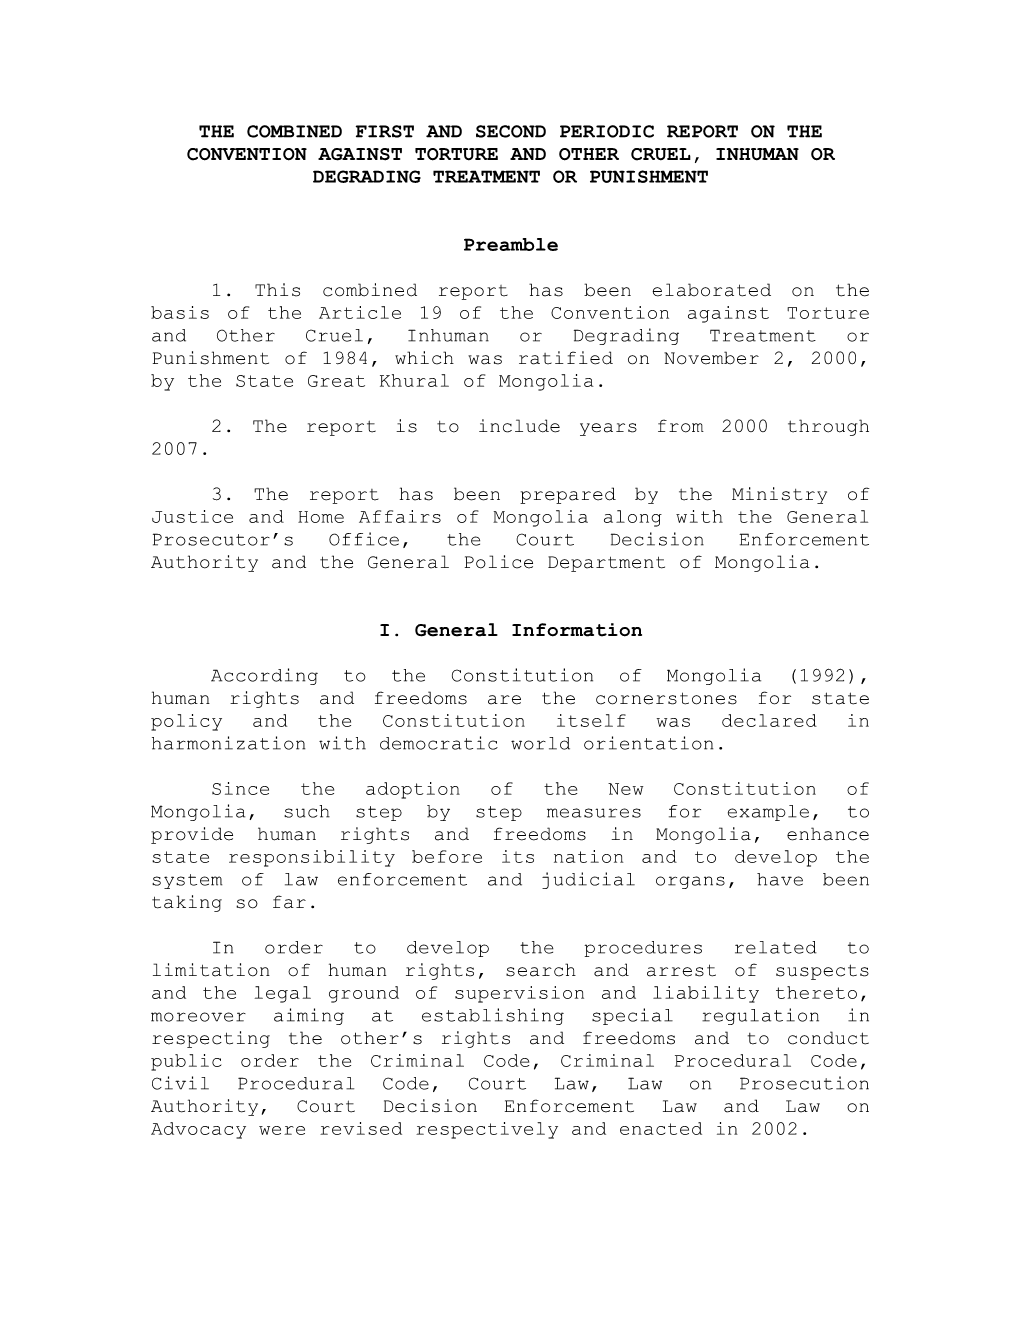 The Combined First and Second Periodic Report on the Convention Against Torture and Other